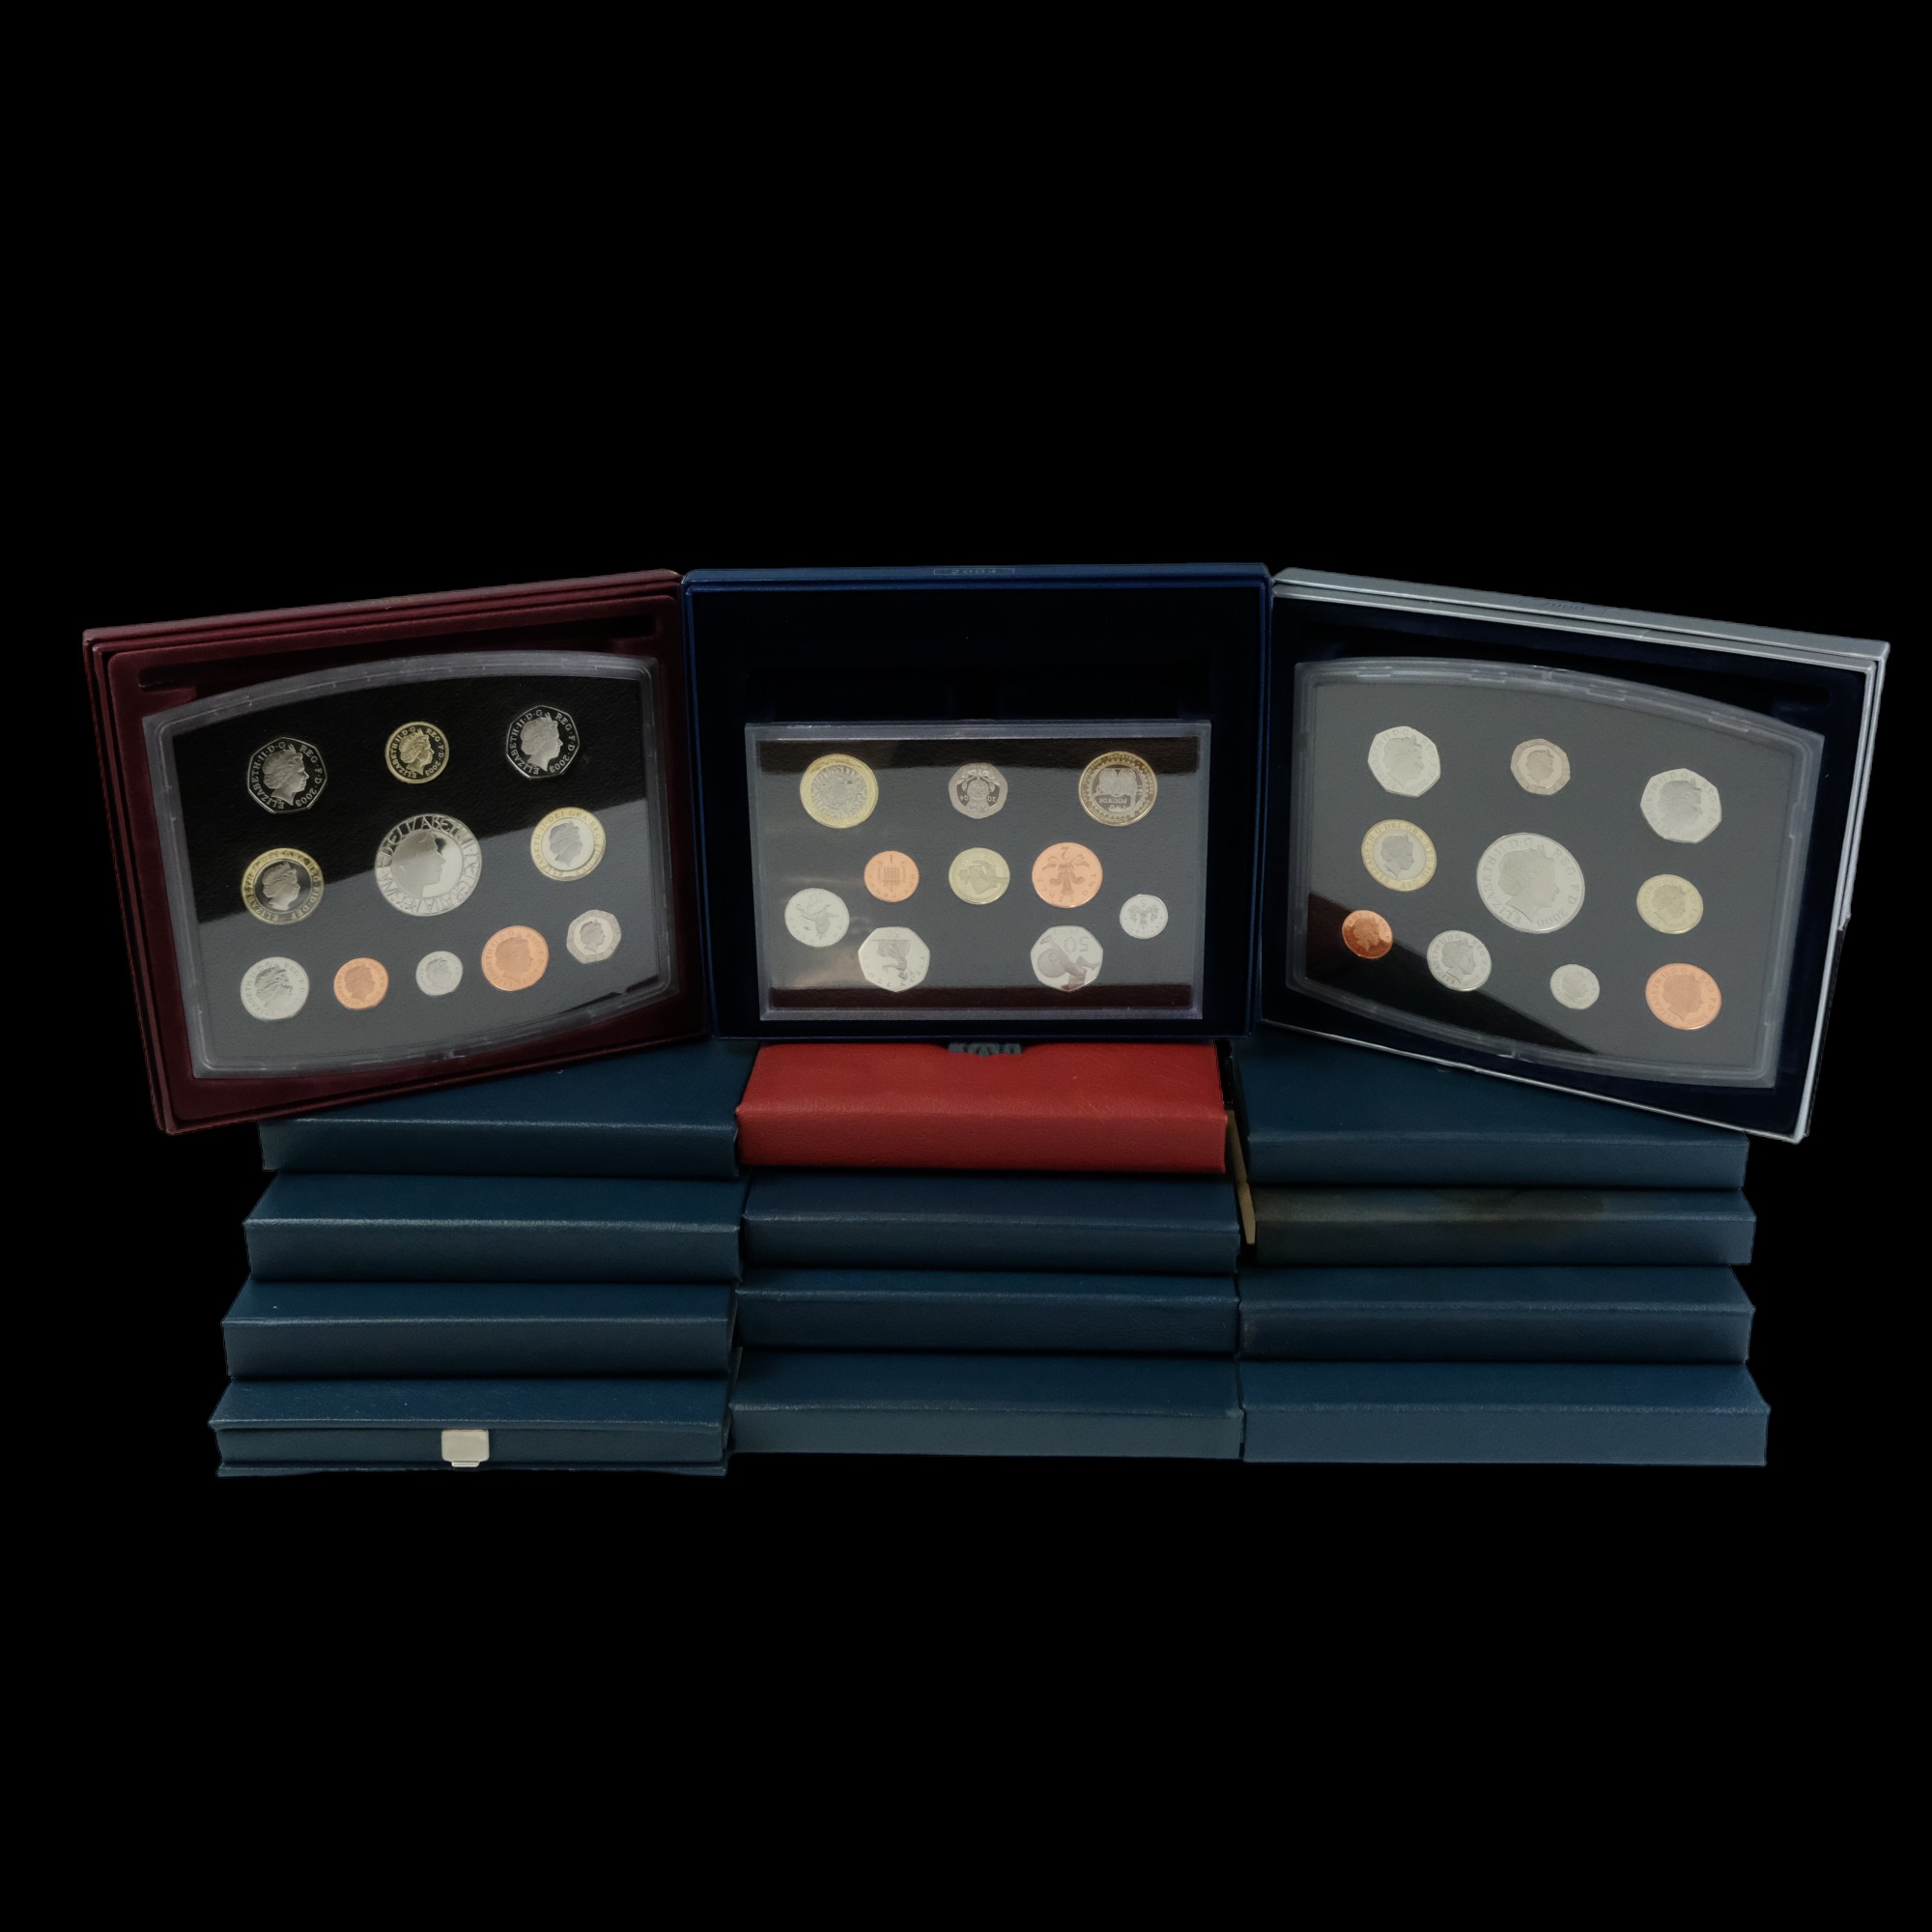 A collection of Royal Mint proof year coin sets, 1985-2004, (lacking four years)